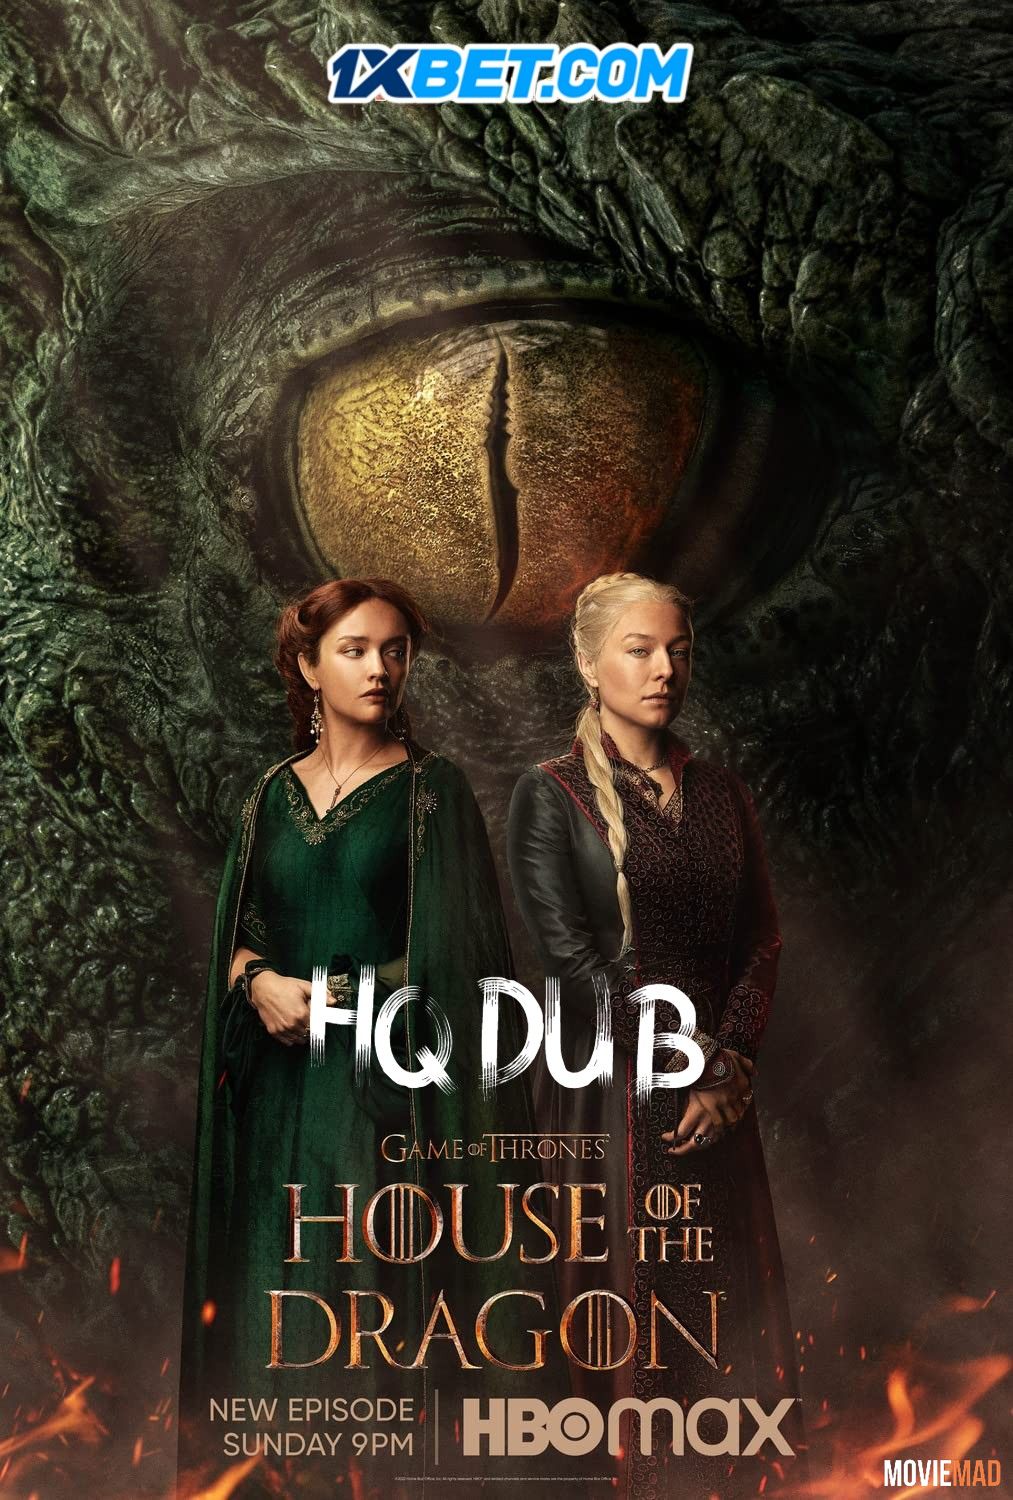 full moviesHouse Of The Dragon S01E07 (2022) Hindi (Voice Over) Dubbed HBOMAX HDRip 1080p 720p 480p